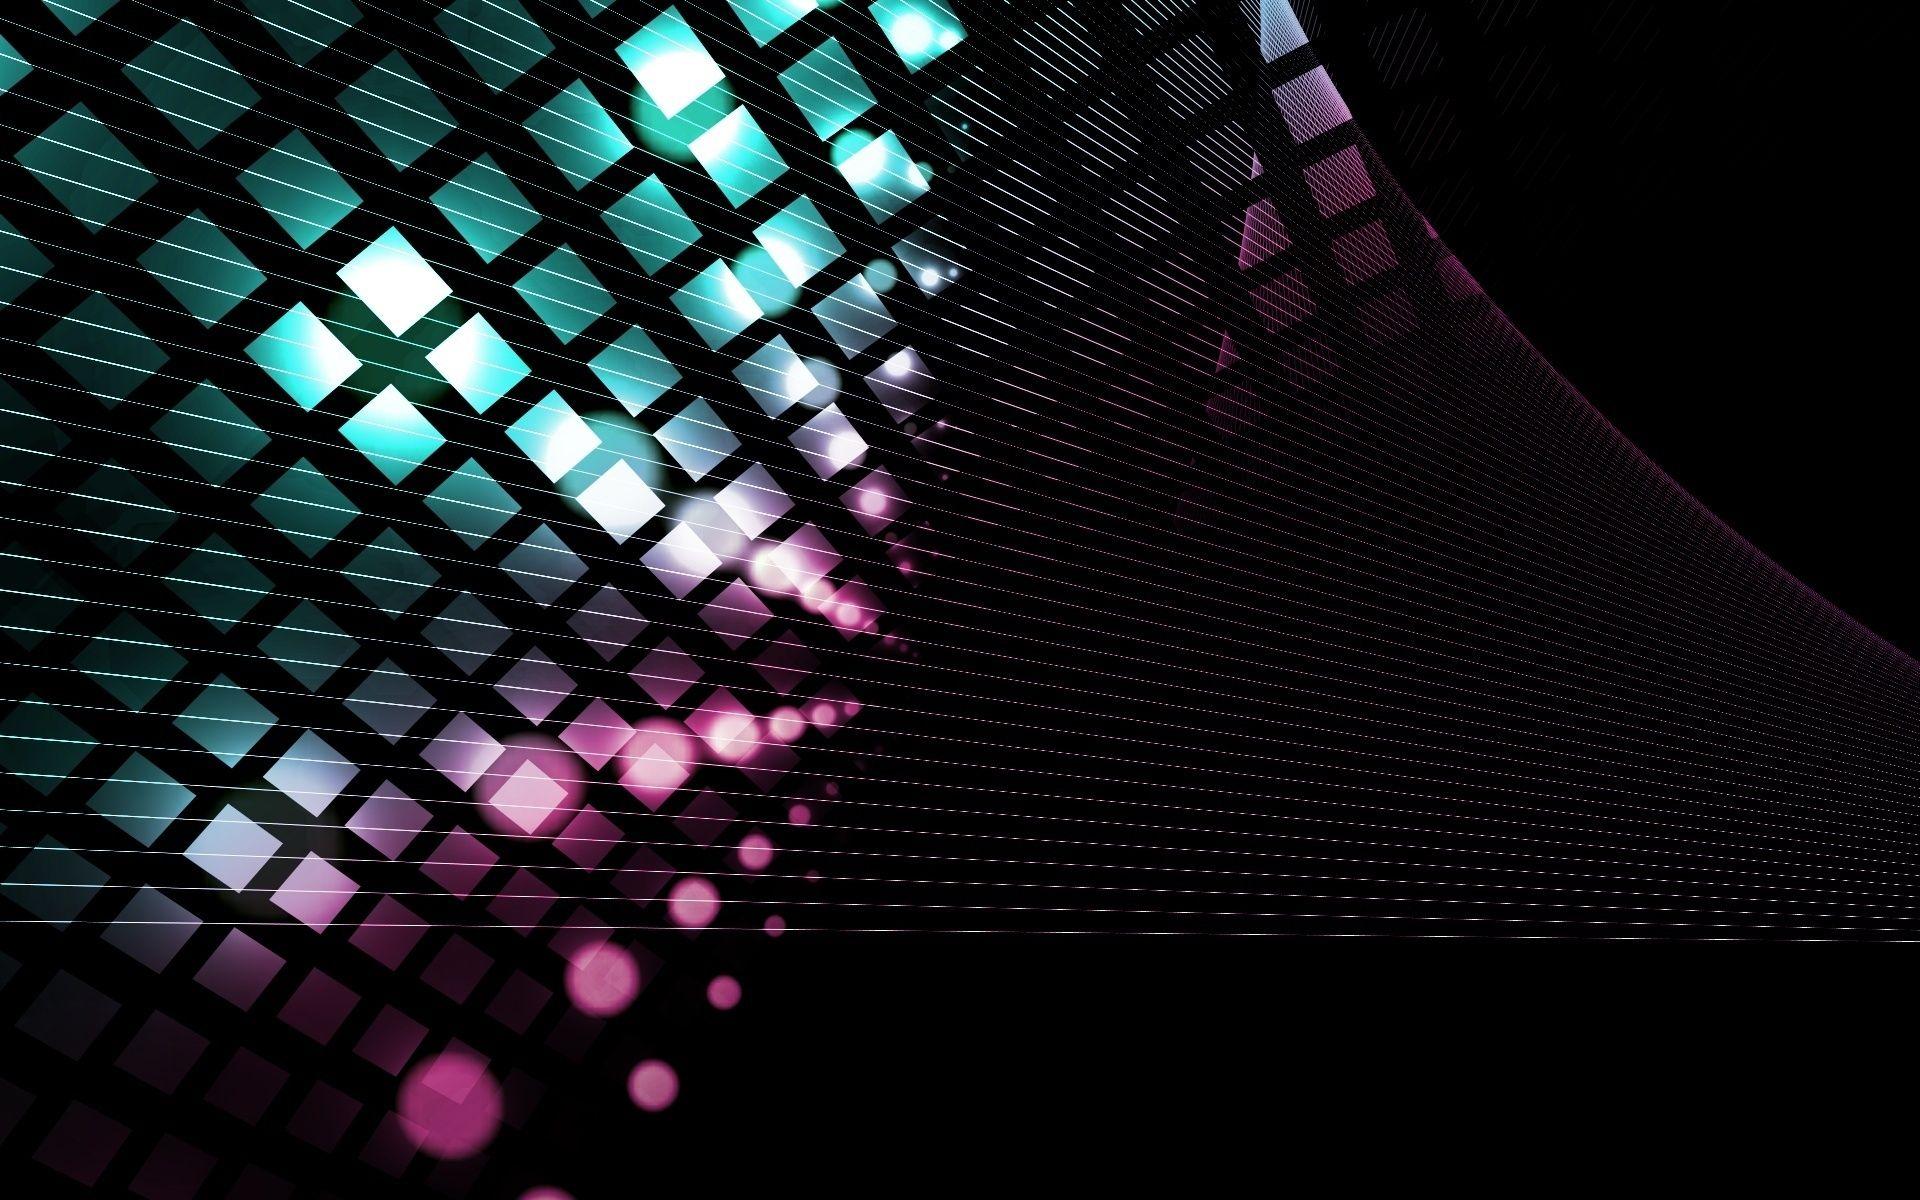 Light grid wallpaper and image, picture, photo